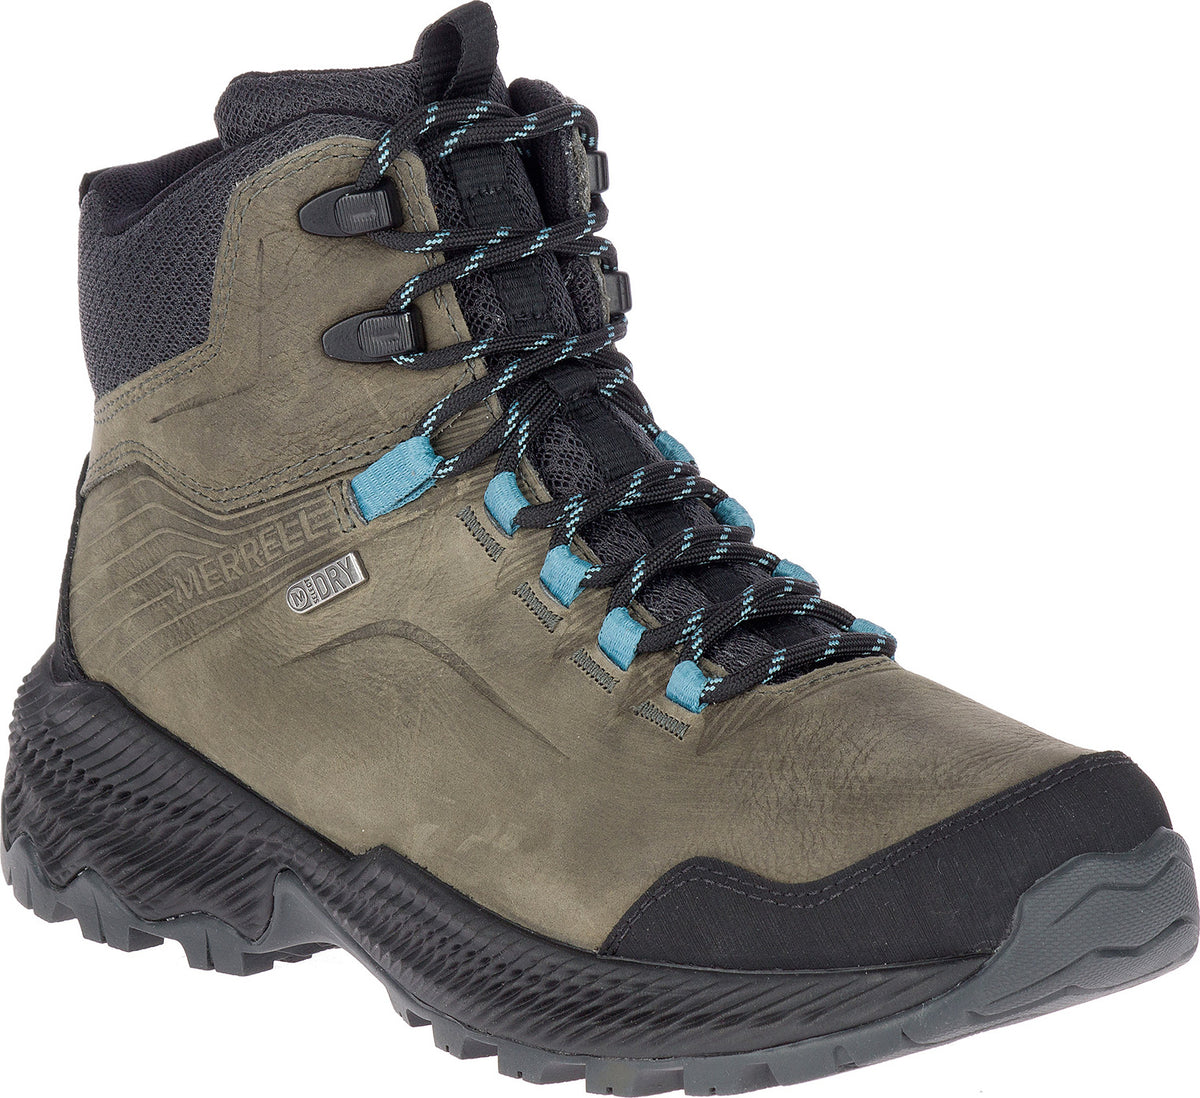 Merrell Forestbound Mid Waterproof Boots - Women's | Altitude Sports